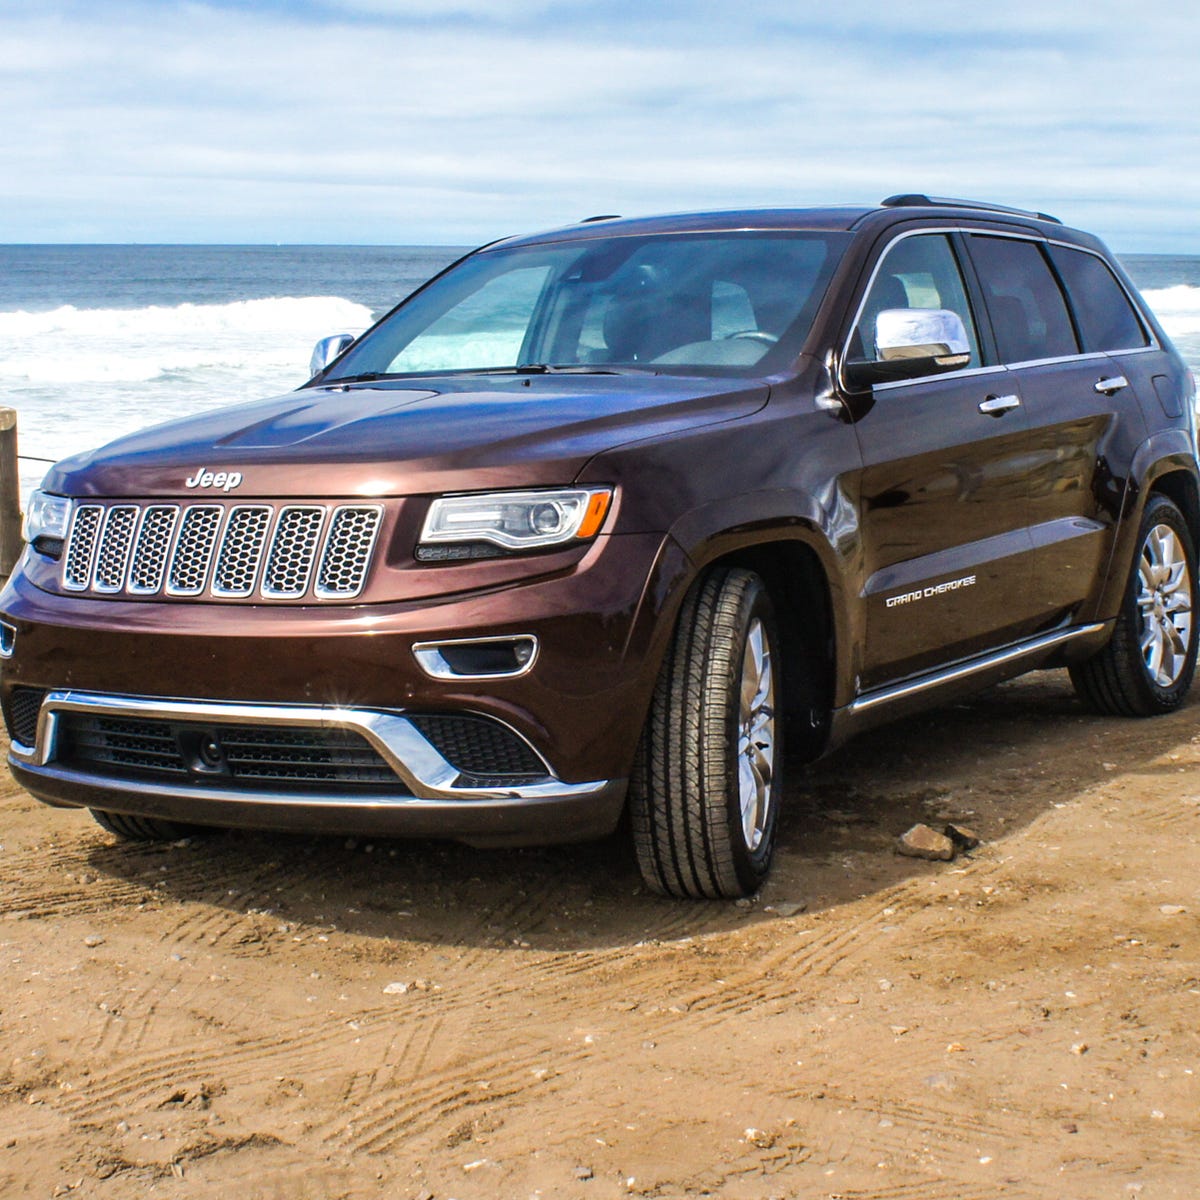 2014 Jeep Grand Cherokee EcoDiesel review: Diesel option improves the  ultracapable Jeep Grand Cherokee's fuel economy - CNET